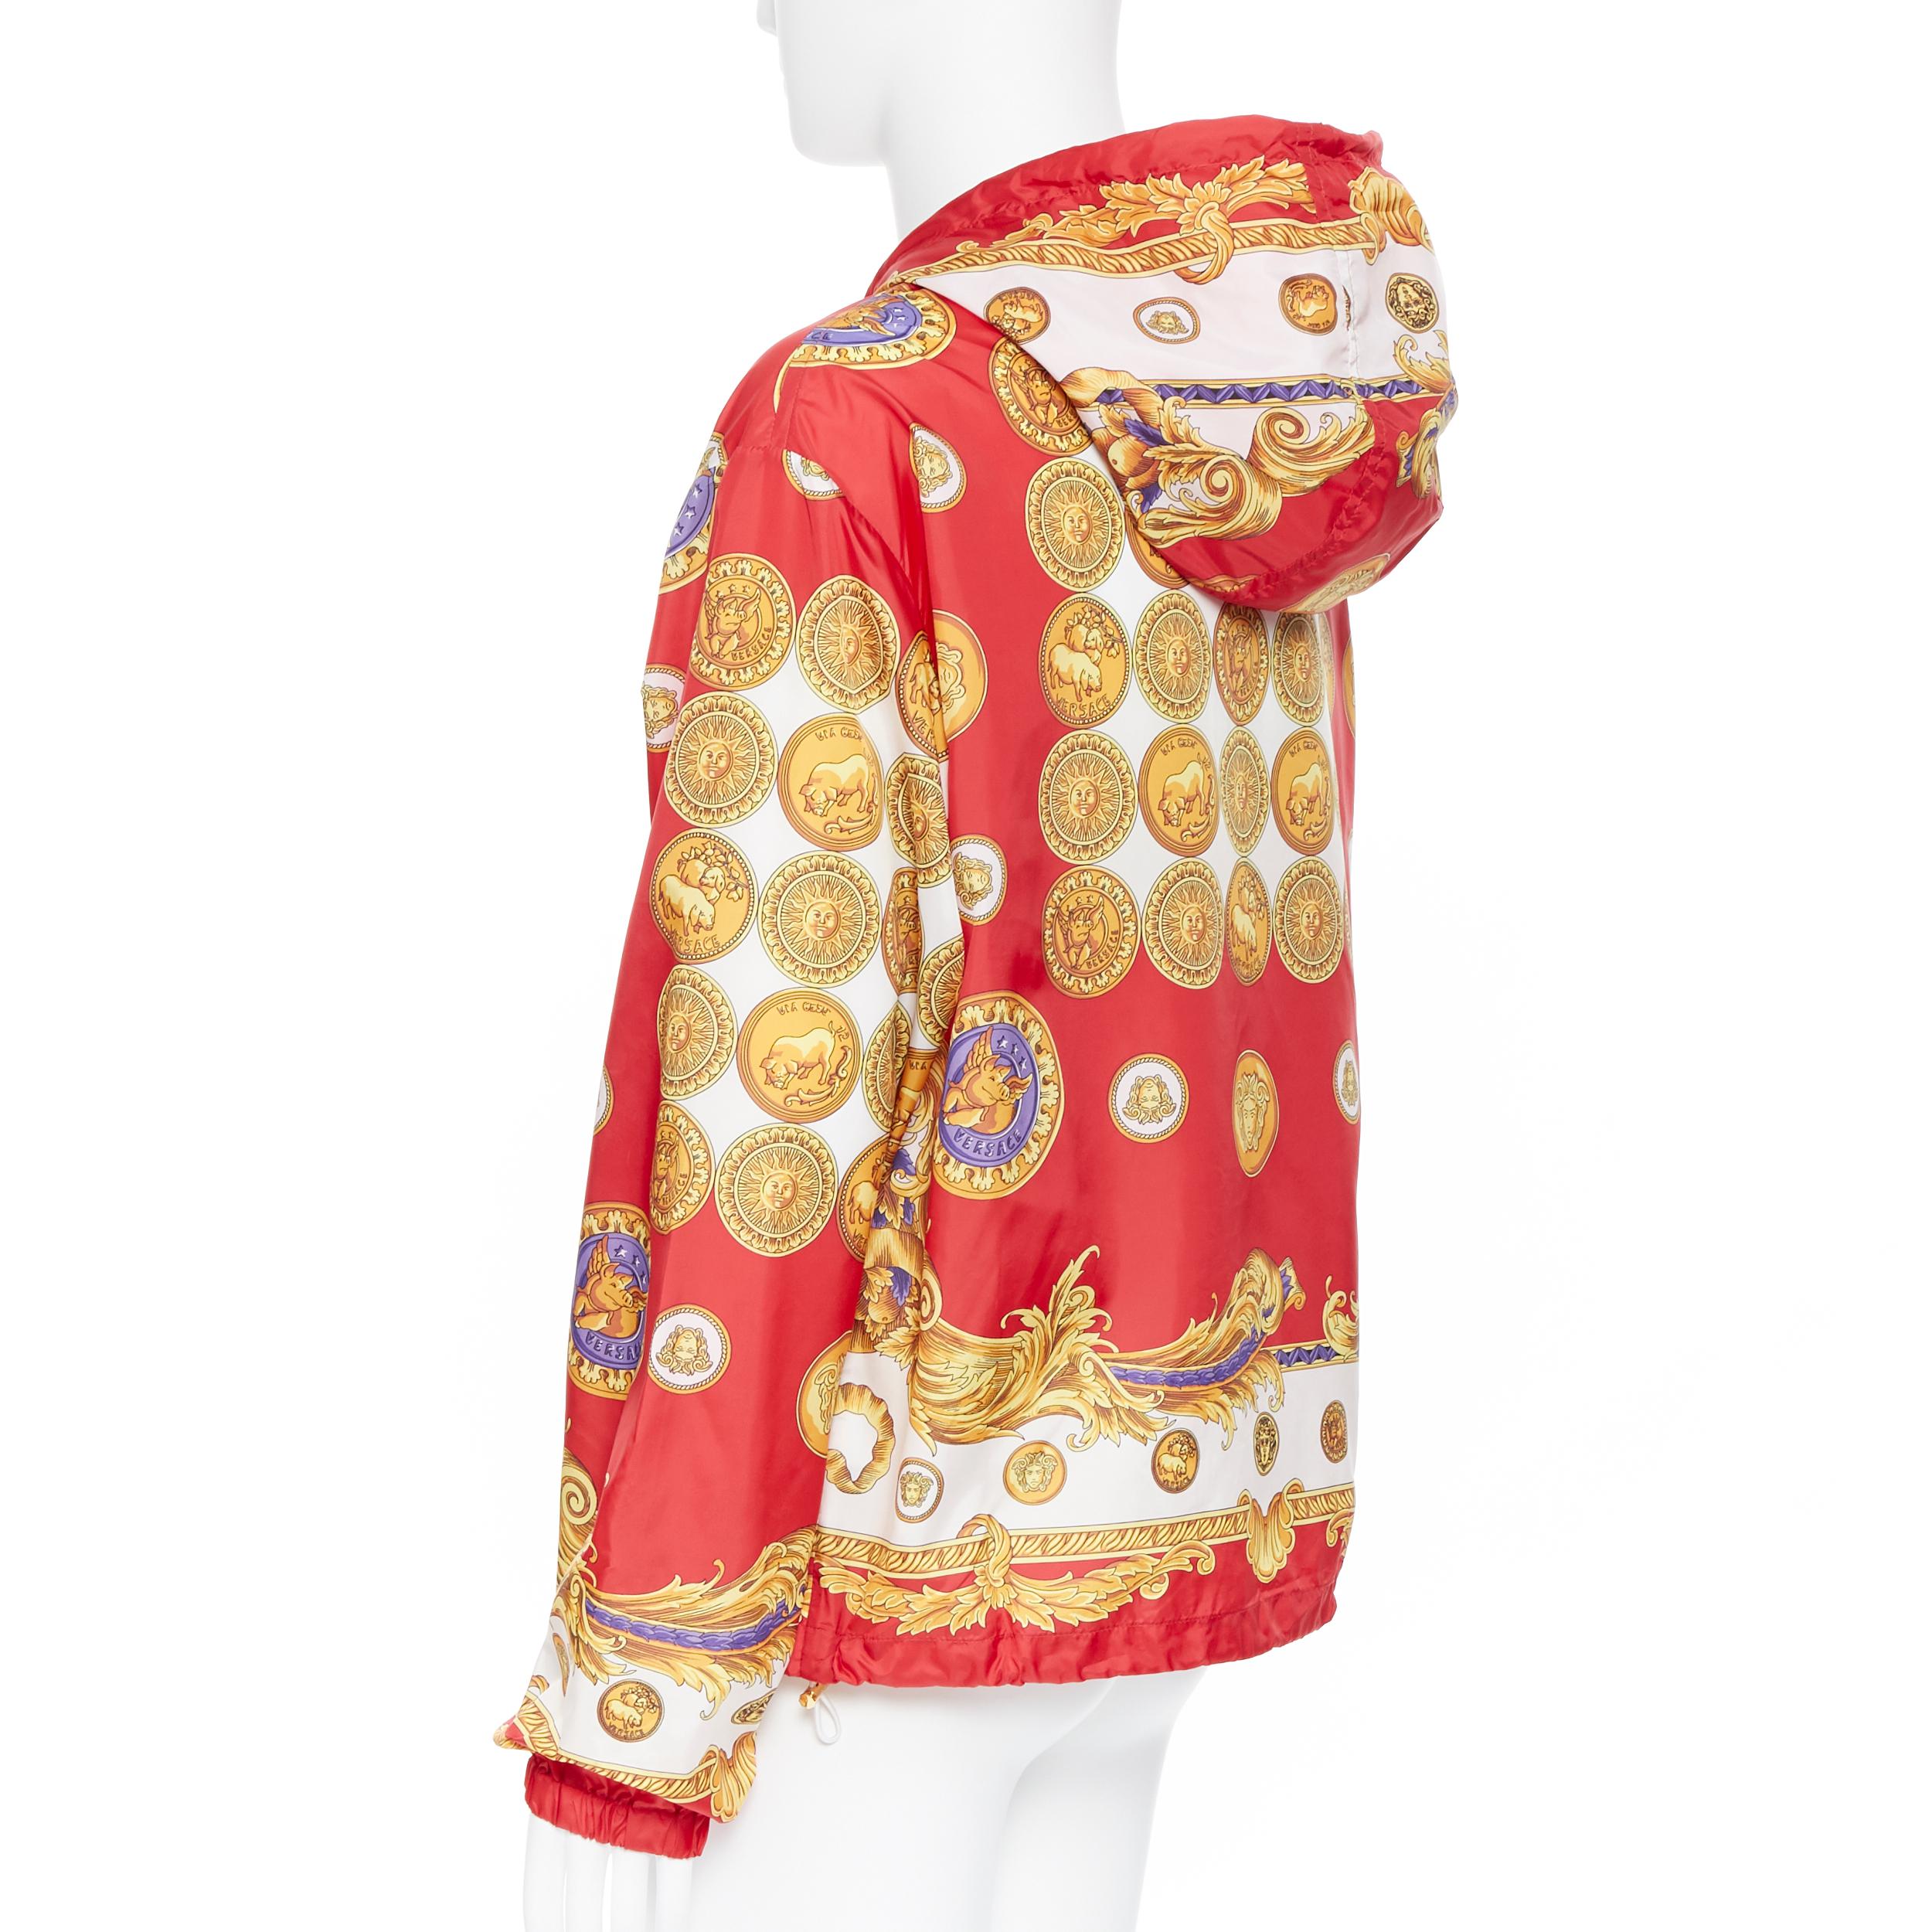 new VERSACE Limited Gold Pig Medusa Medallion Coin Baroque print hoodie IT56 3XL
Brand: Versace
Designer: Donatella Versace
Collection: 2019
Model Name / Style: Nylon hoodie
Material: Nylon
Color: Red
Pattern: Animal print
Closure: Zip
Extra Detail: